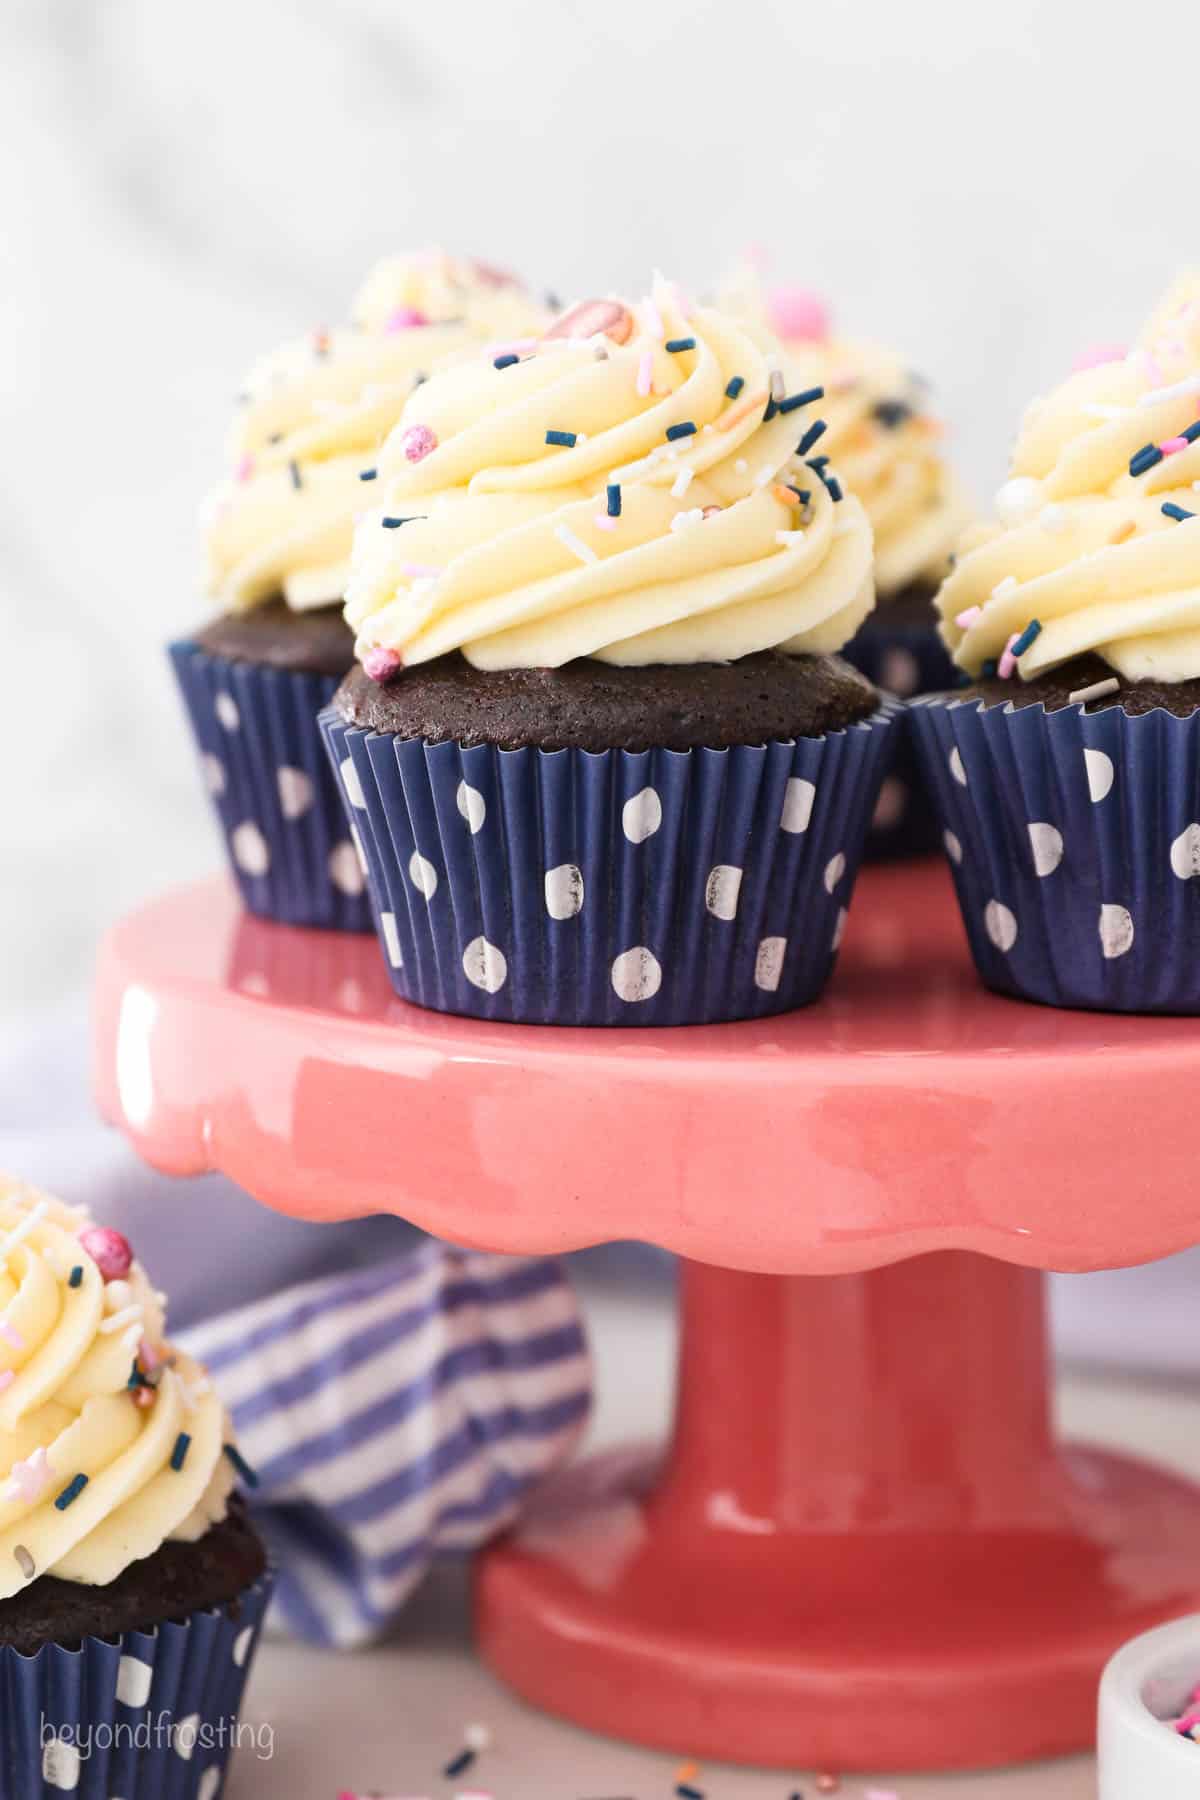 A pink cake stand with chocolate frosted cupcakes in navy blue polka dot wrappers